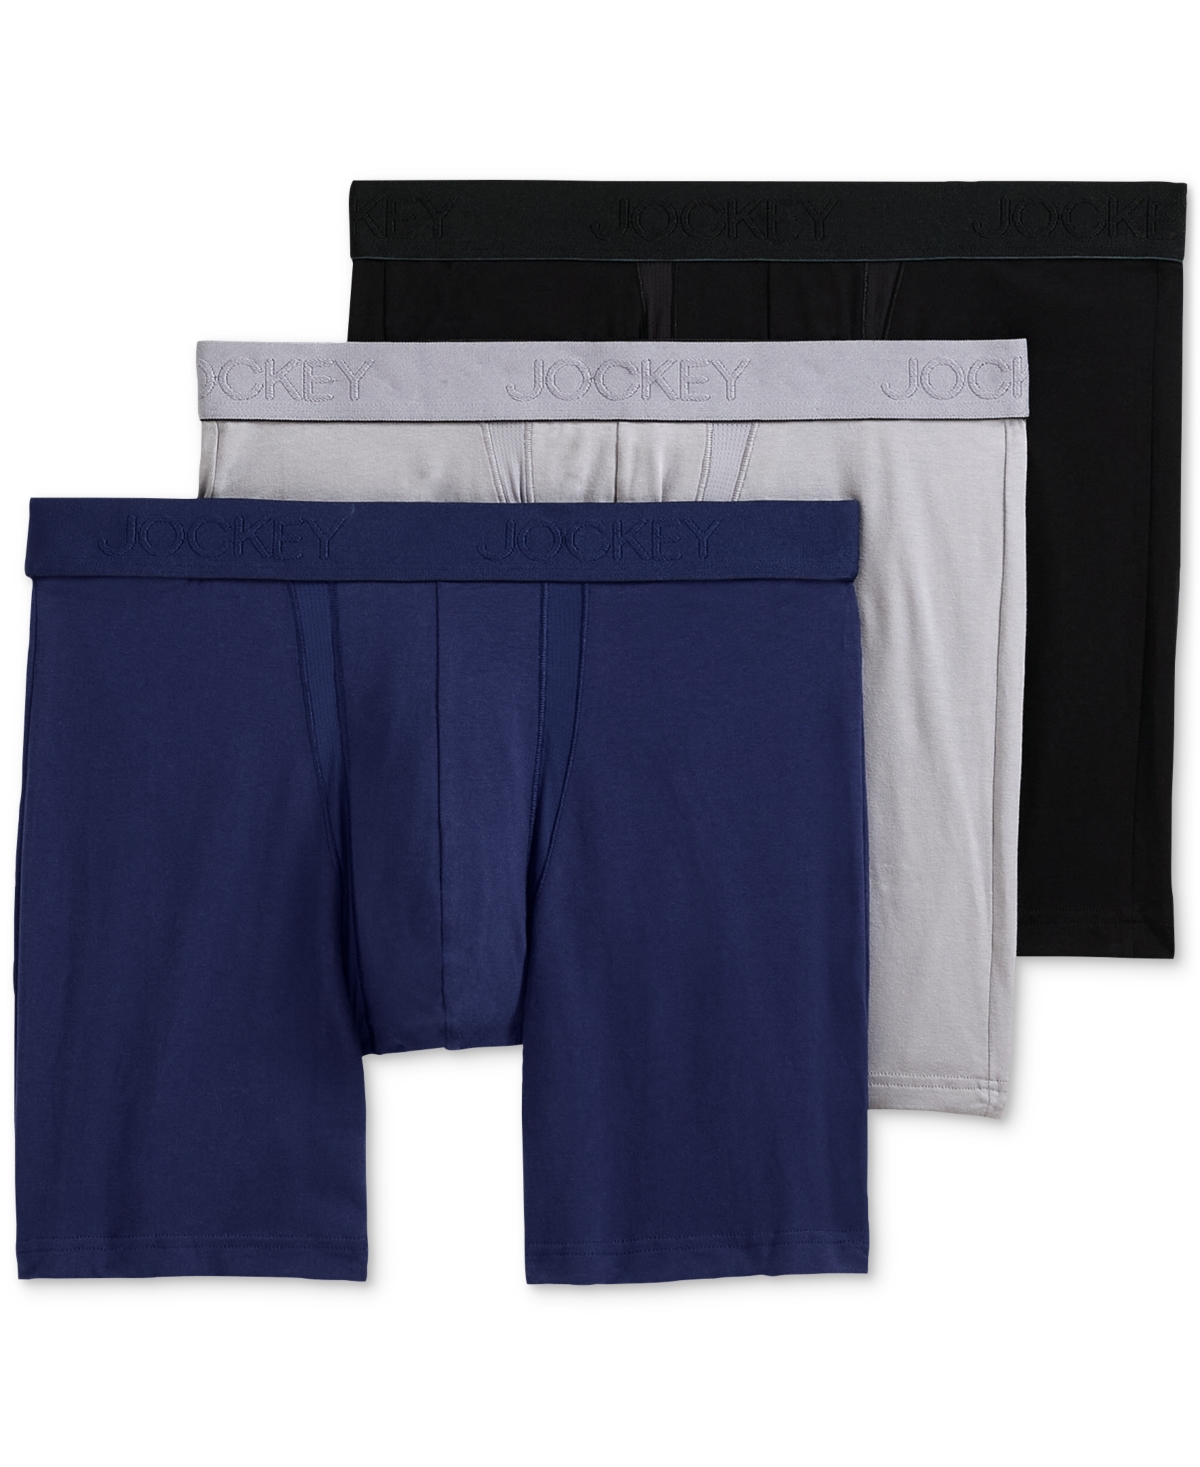 Jockey Men's Chafe Proof Pouch Cotton Stretch 7" Boxer Brief In Black,mid Grey,just Past Midnight